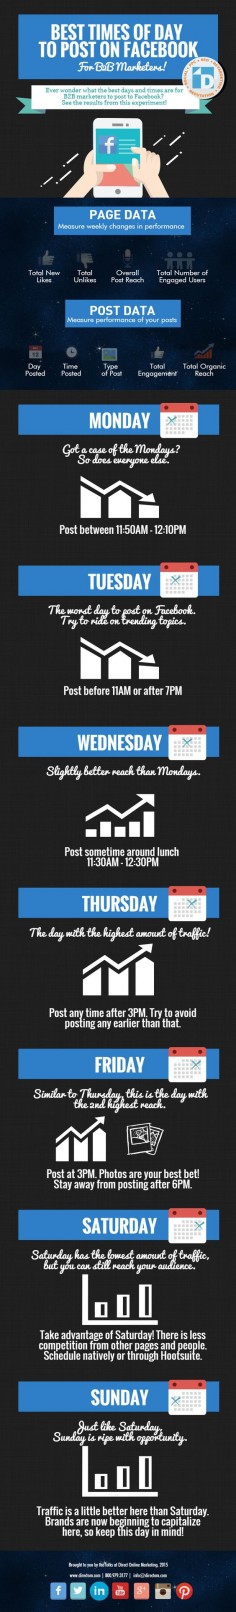 Social Media Infographic: The Best Times of Day to Post on Facebook for B2B Marketers.  Check out the blog post by Stephen!